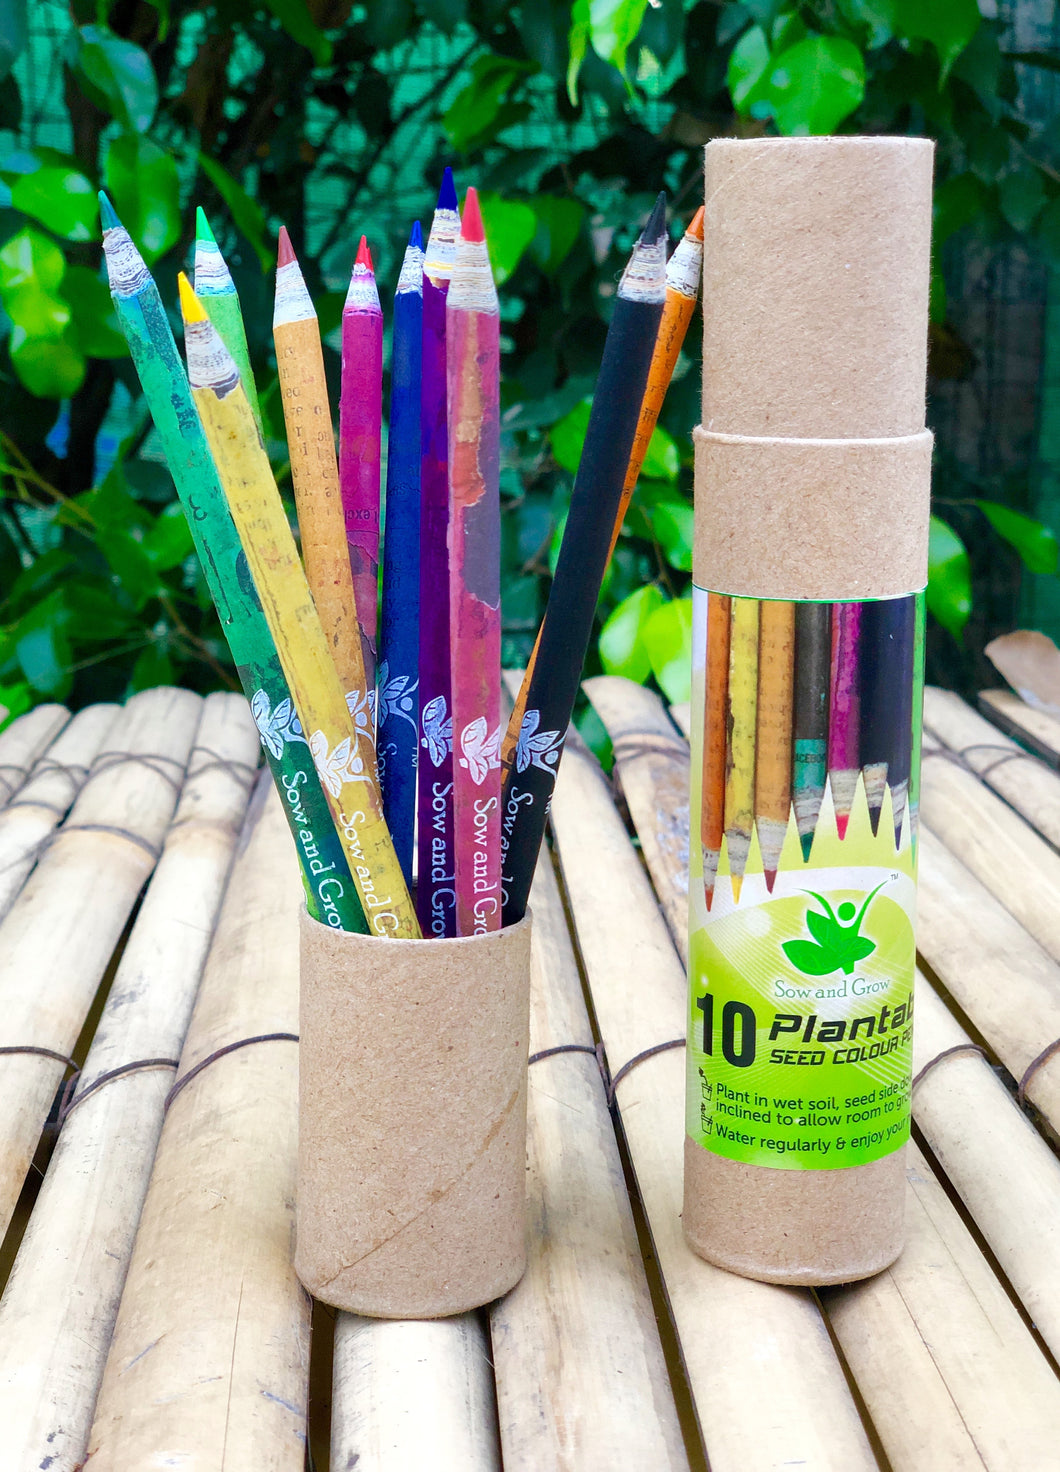 Sow and Grow 10 Plantable Seed Colour Pencils in a Re-usable Pencil Box